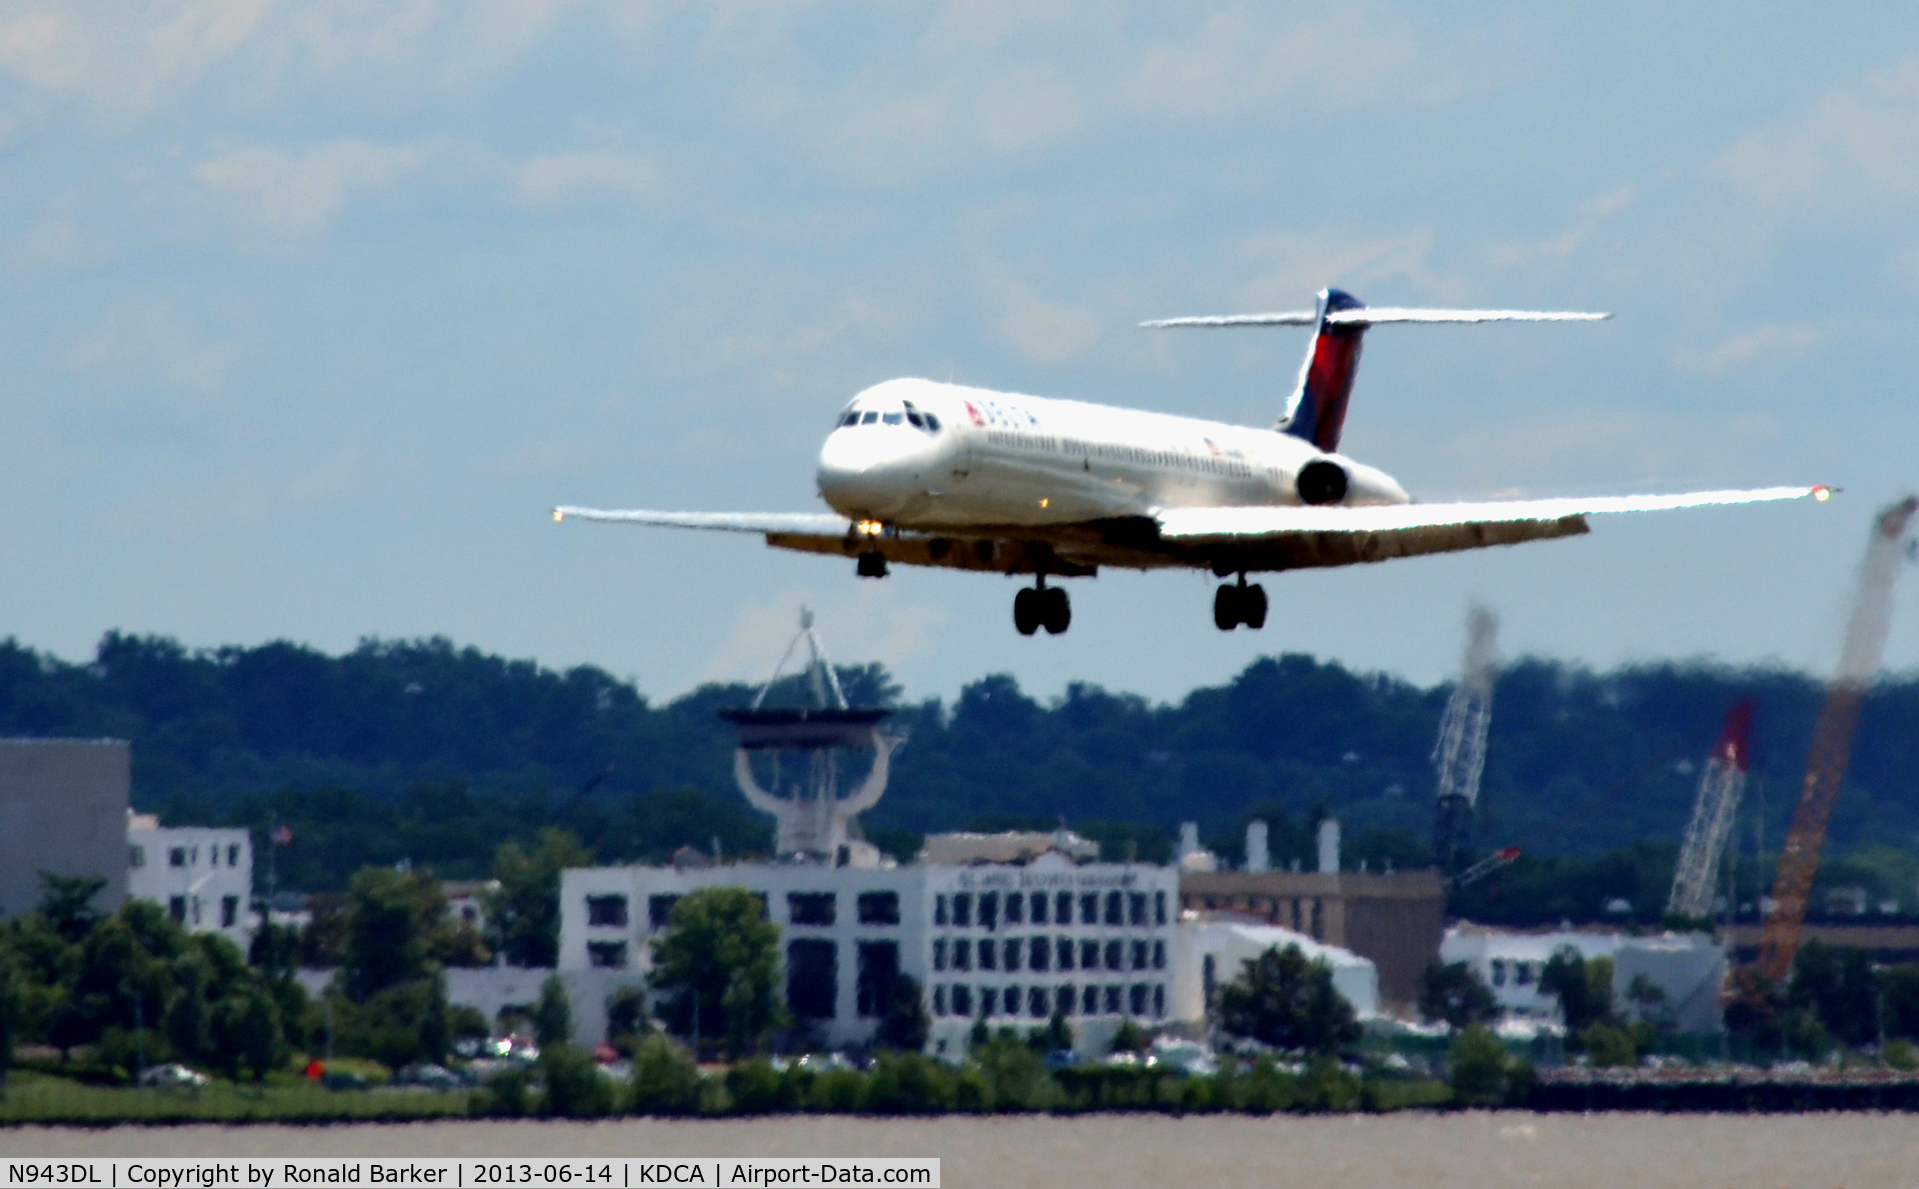 N943DL, 1989 McDonnell Douglas MD-88 C/N 49816, Approach to DCA